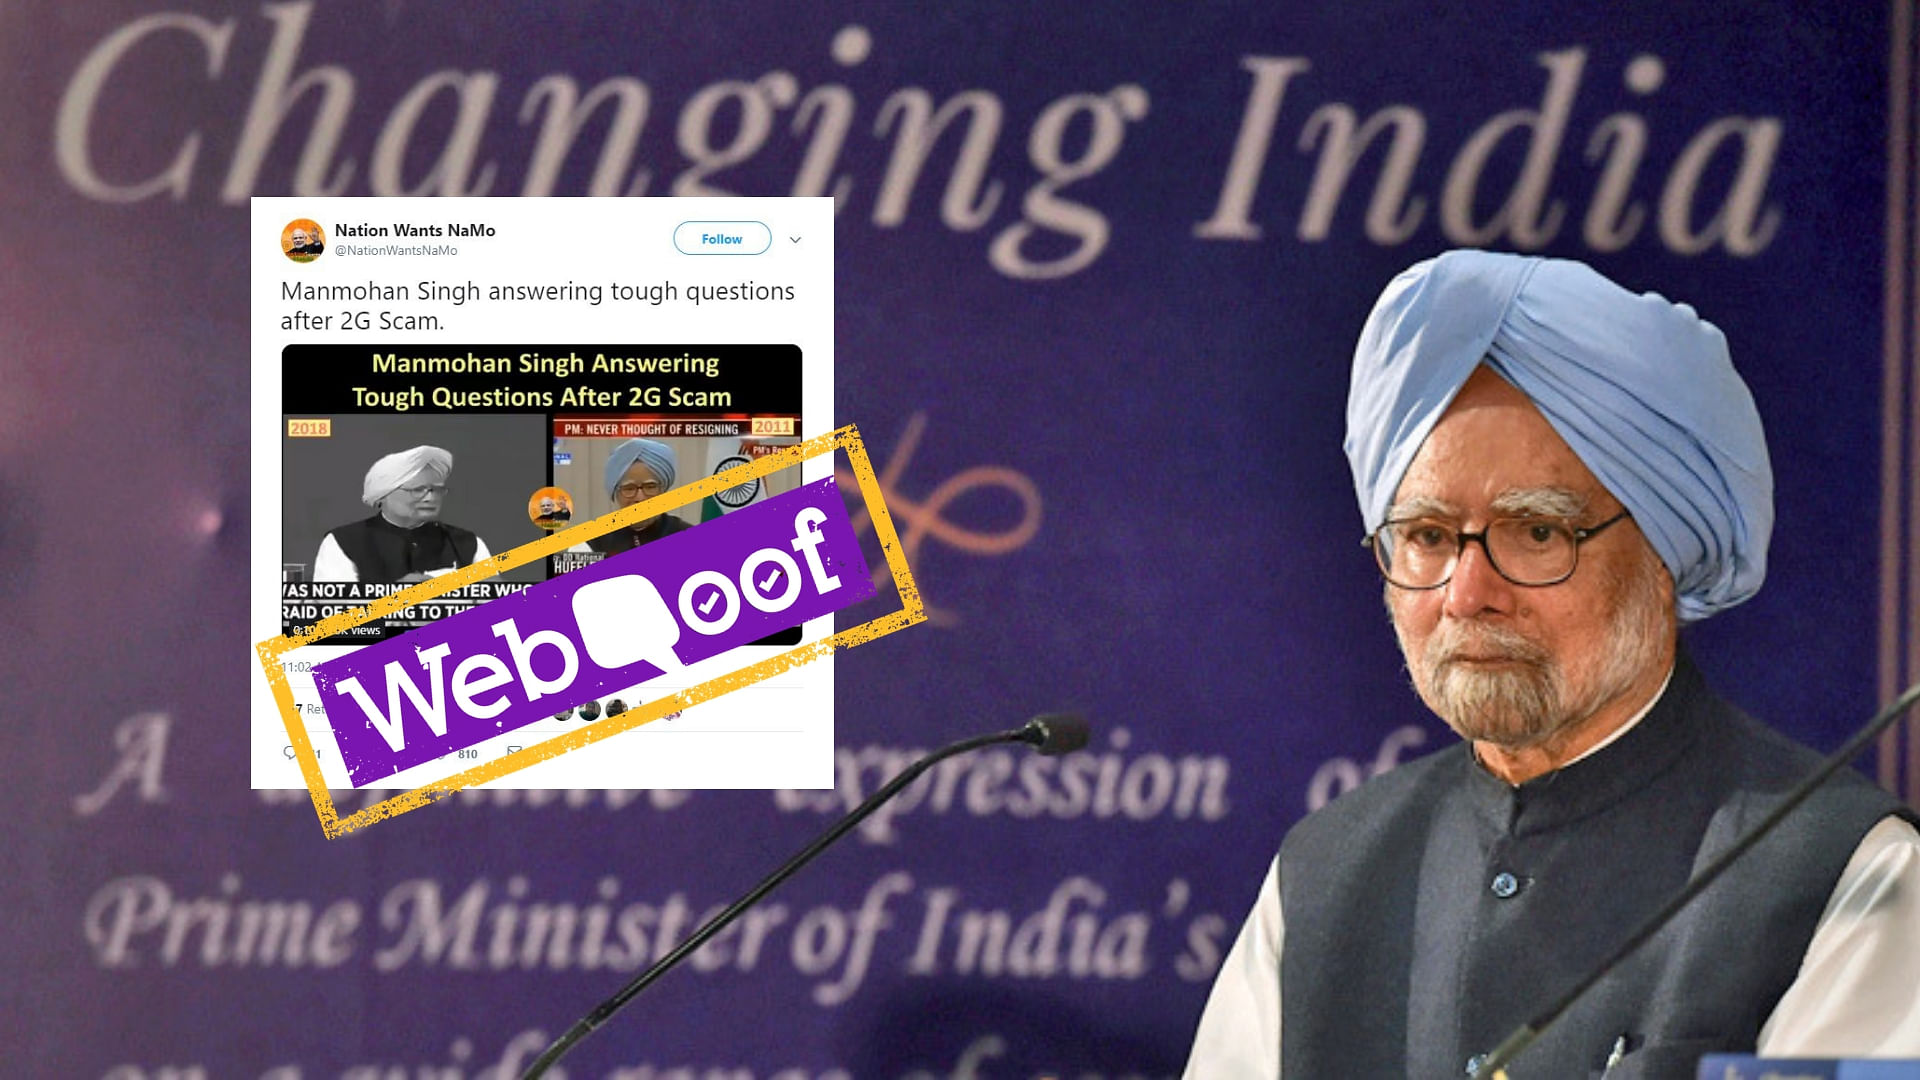 An edited video of former Prime Minister Manmohan Singh is going viral on social media after he took a jibe at his successor Narendra Modi over press meetings.